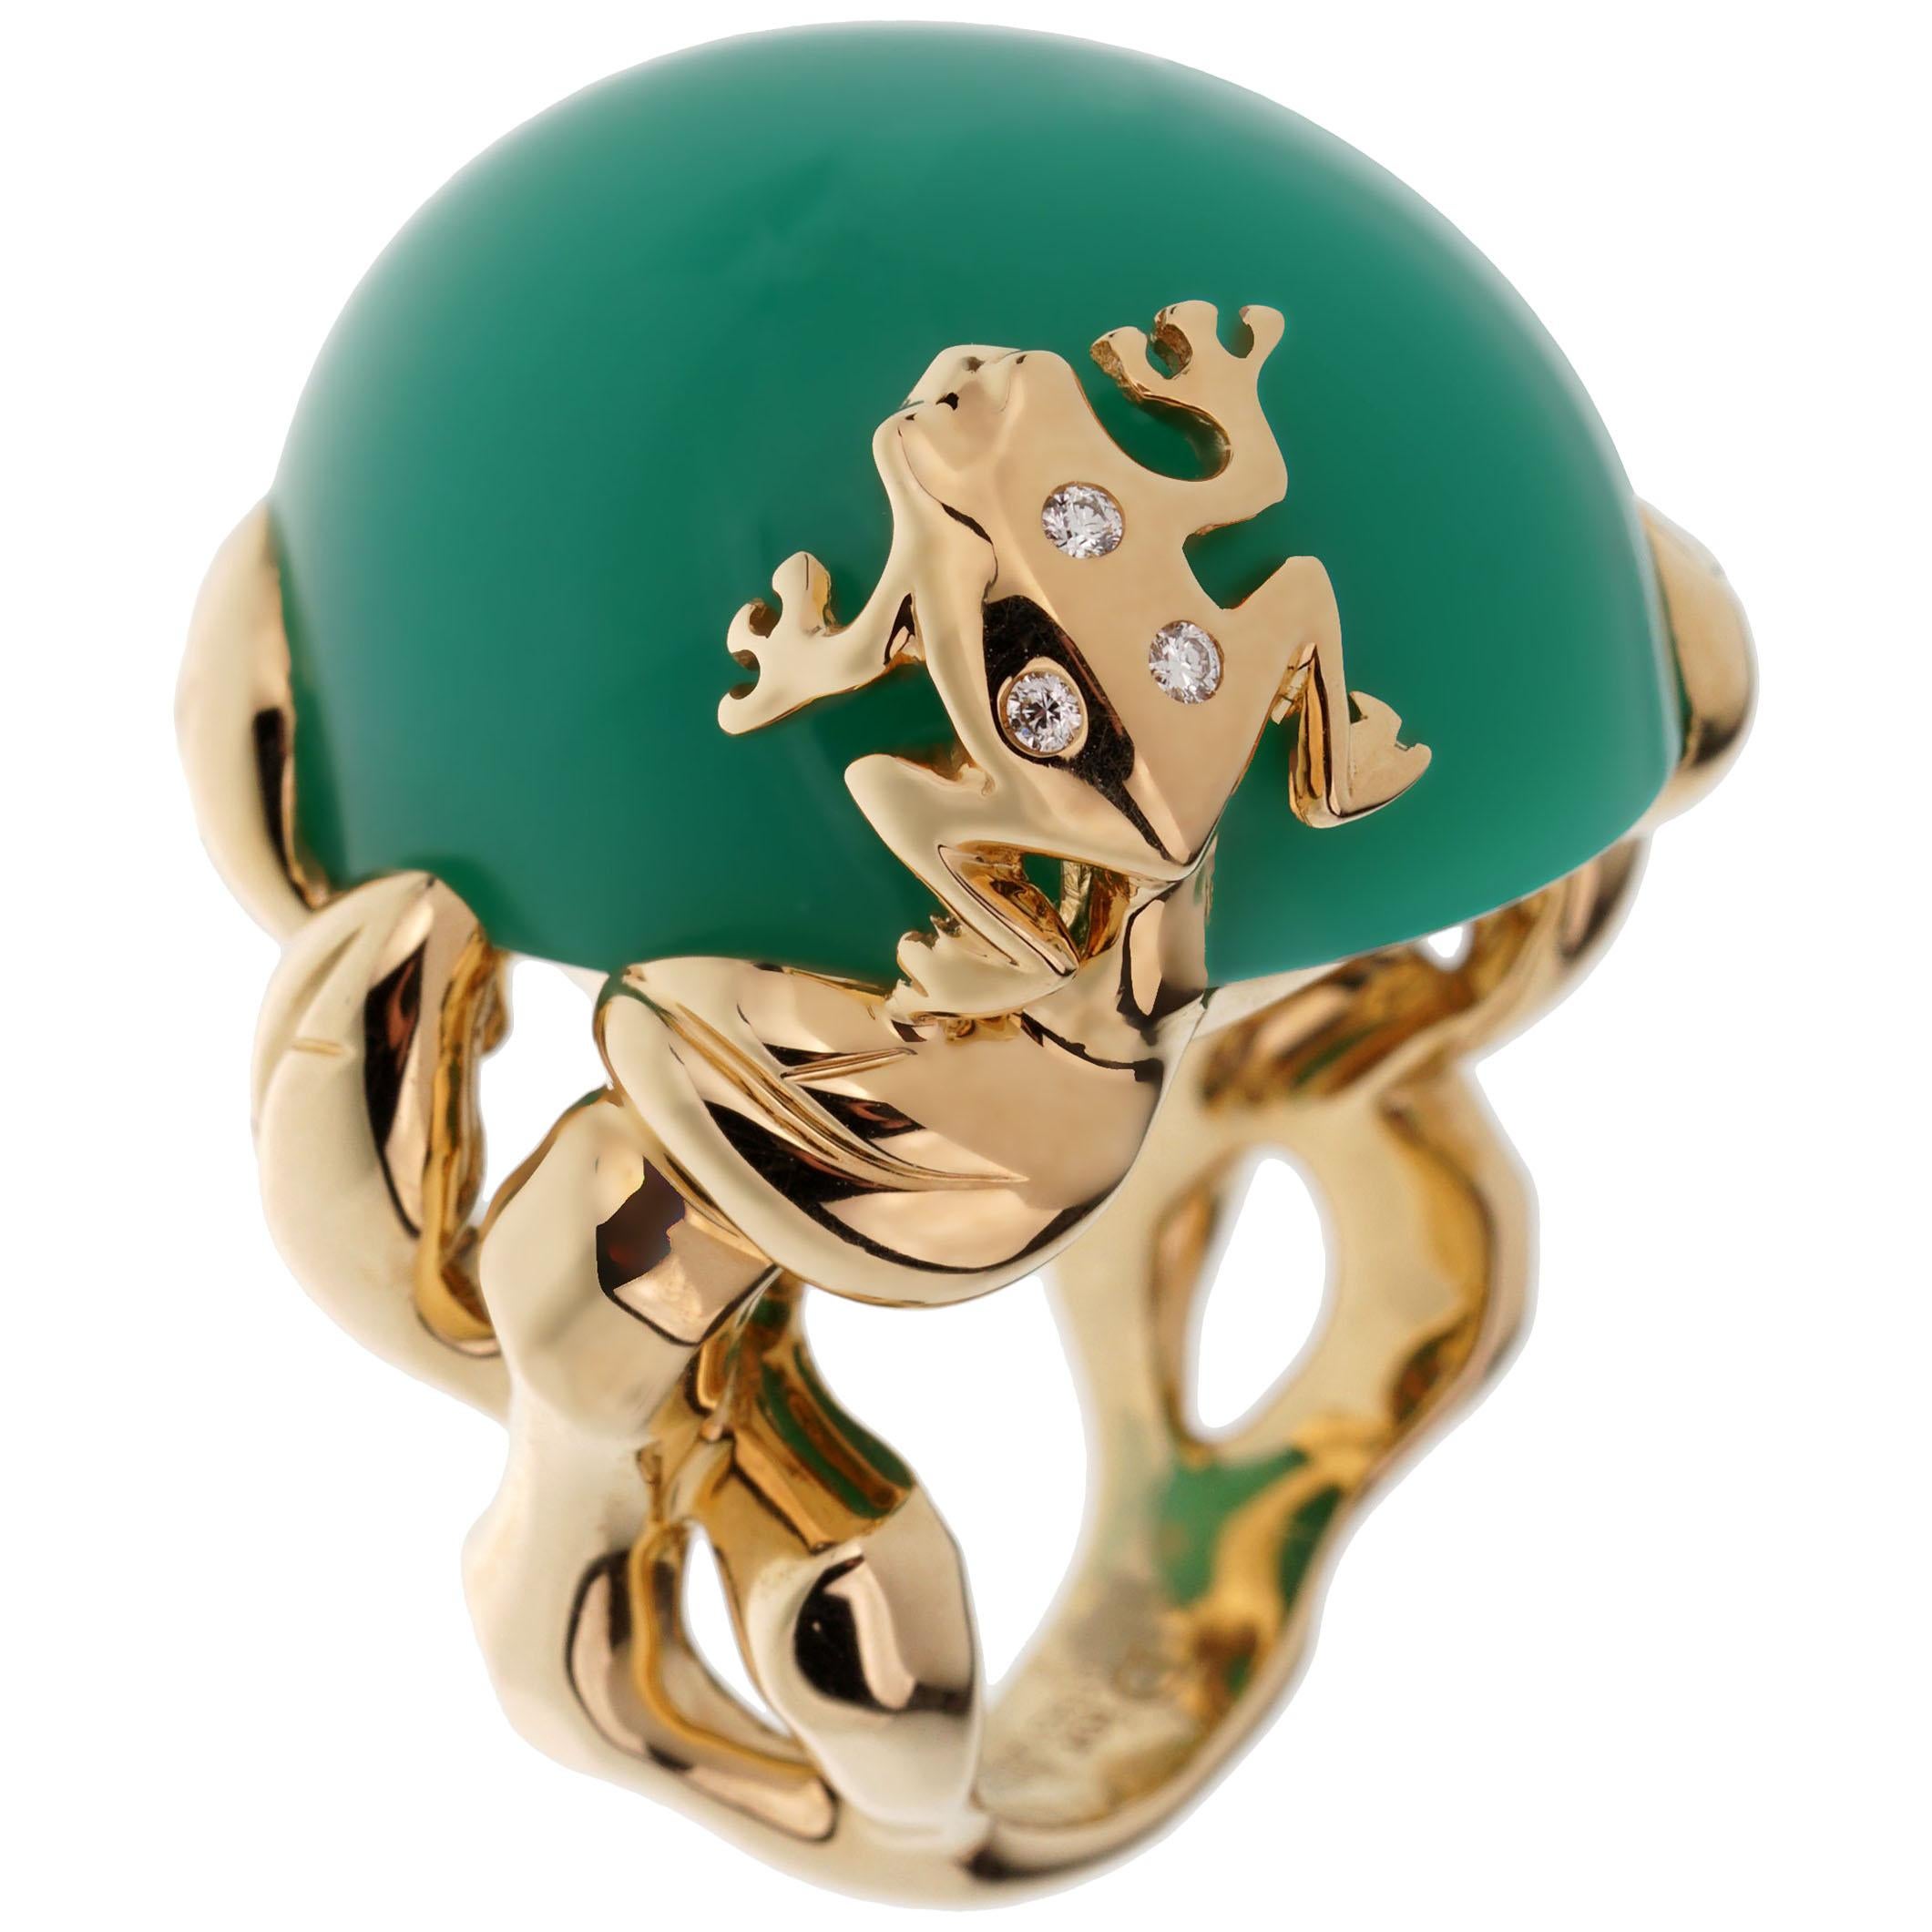 A stunning Dior cocktail ring showcasing a 40ct Chrysoprase wrapped in shimmering 18k yellow gold adorned with a frog motif set with 3 of the finest round brilliant cut diamonds. 

$24,200 retail